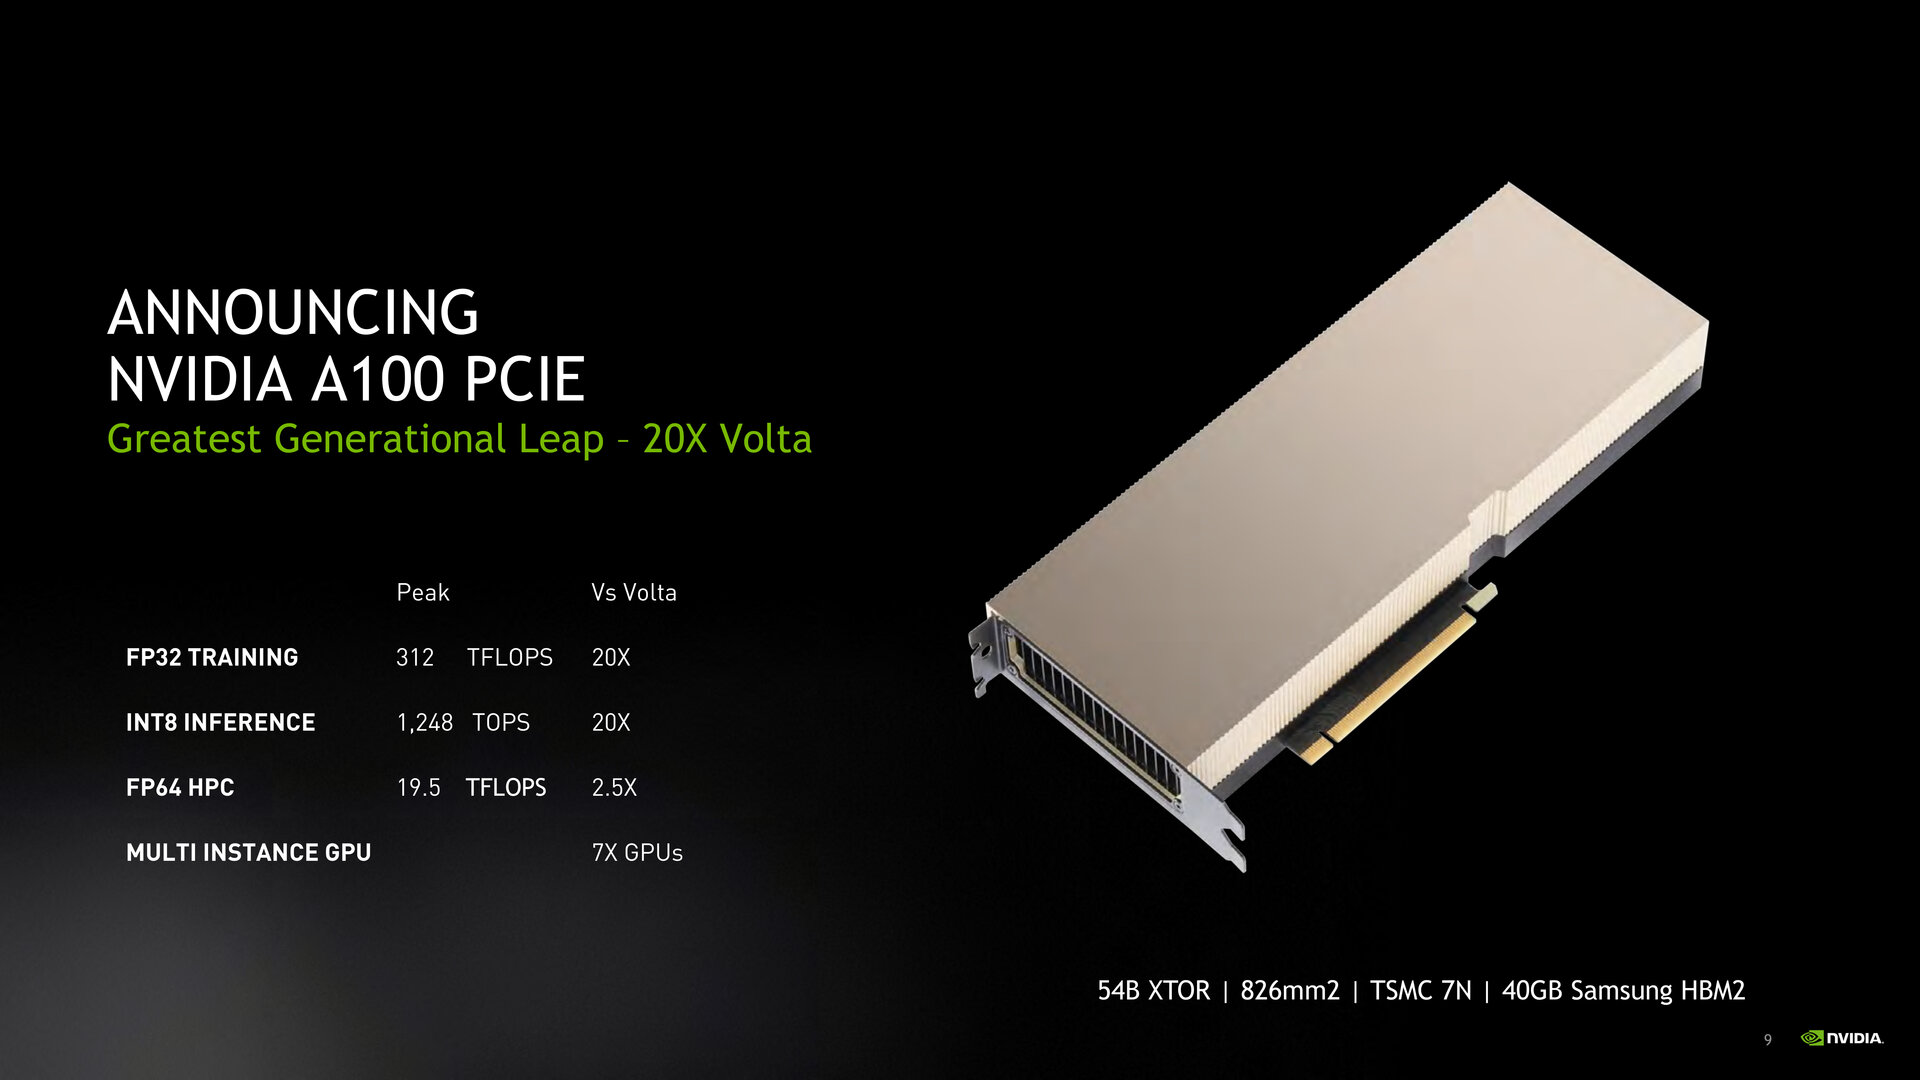 NVIDIA Ampere A100 PCle